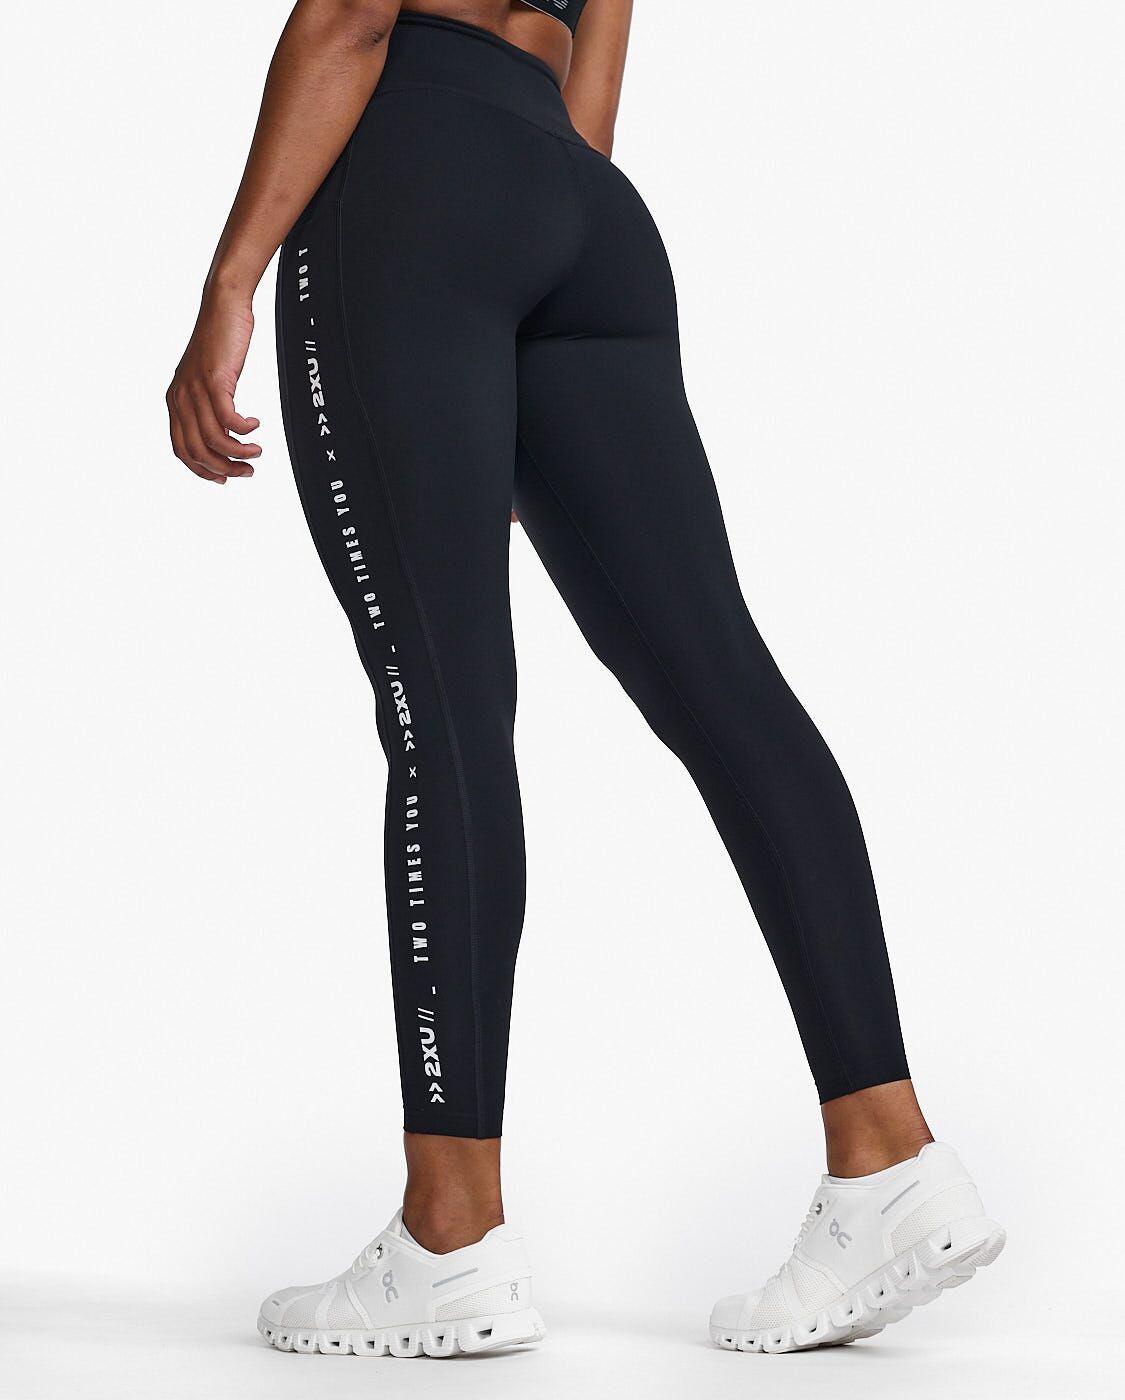 2XU South Africa - Womens Form Lineup Hi-Rise Comp Tight - BLK/WHT